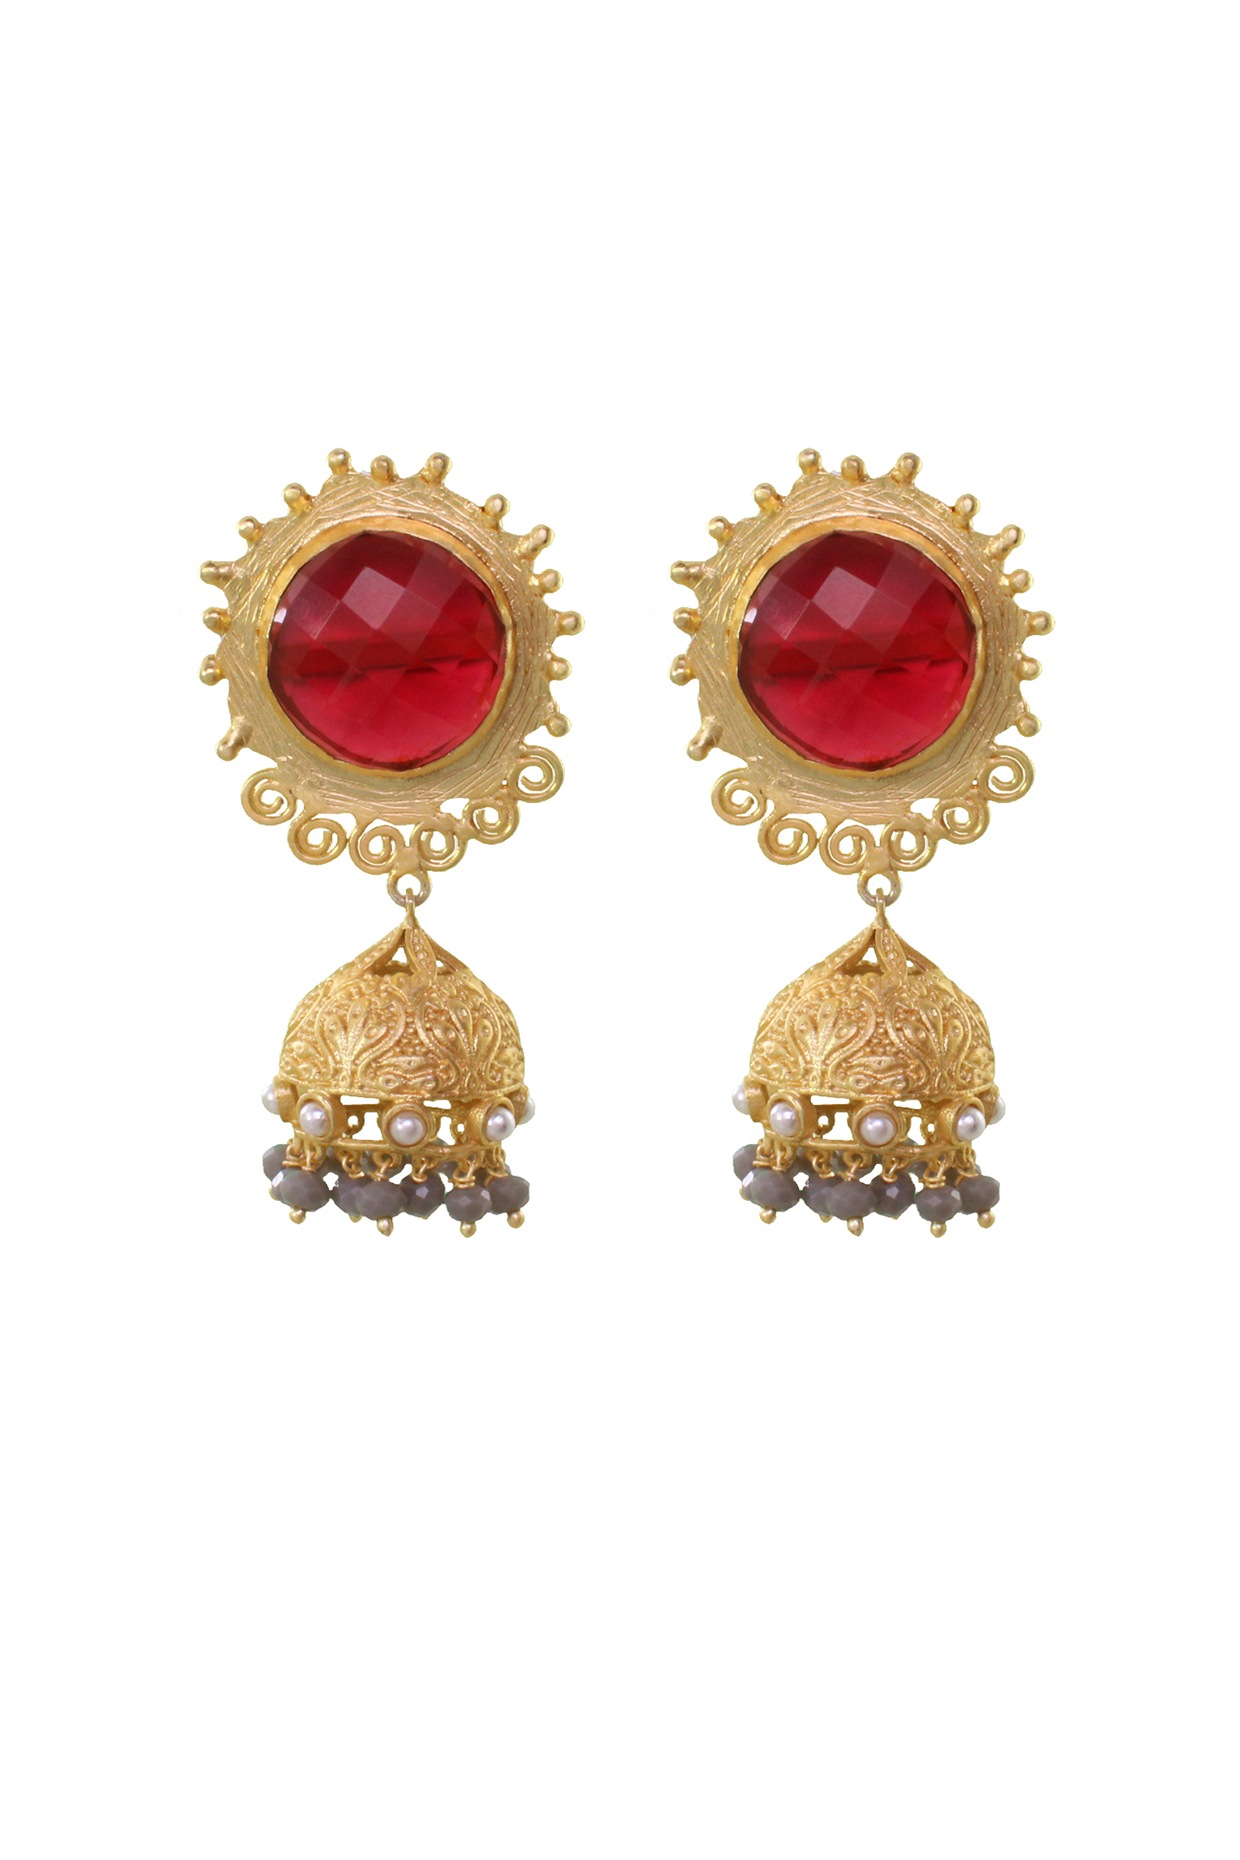 Buy American Diamond and Red Stone Jhumkas Earrings Online in India - Etsy